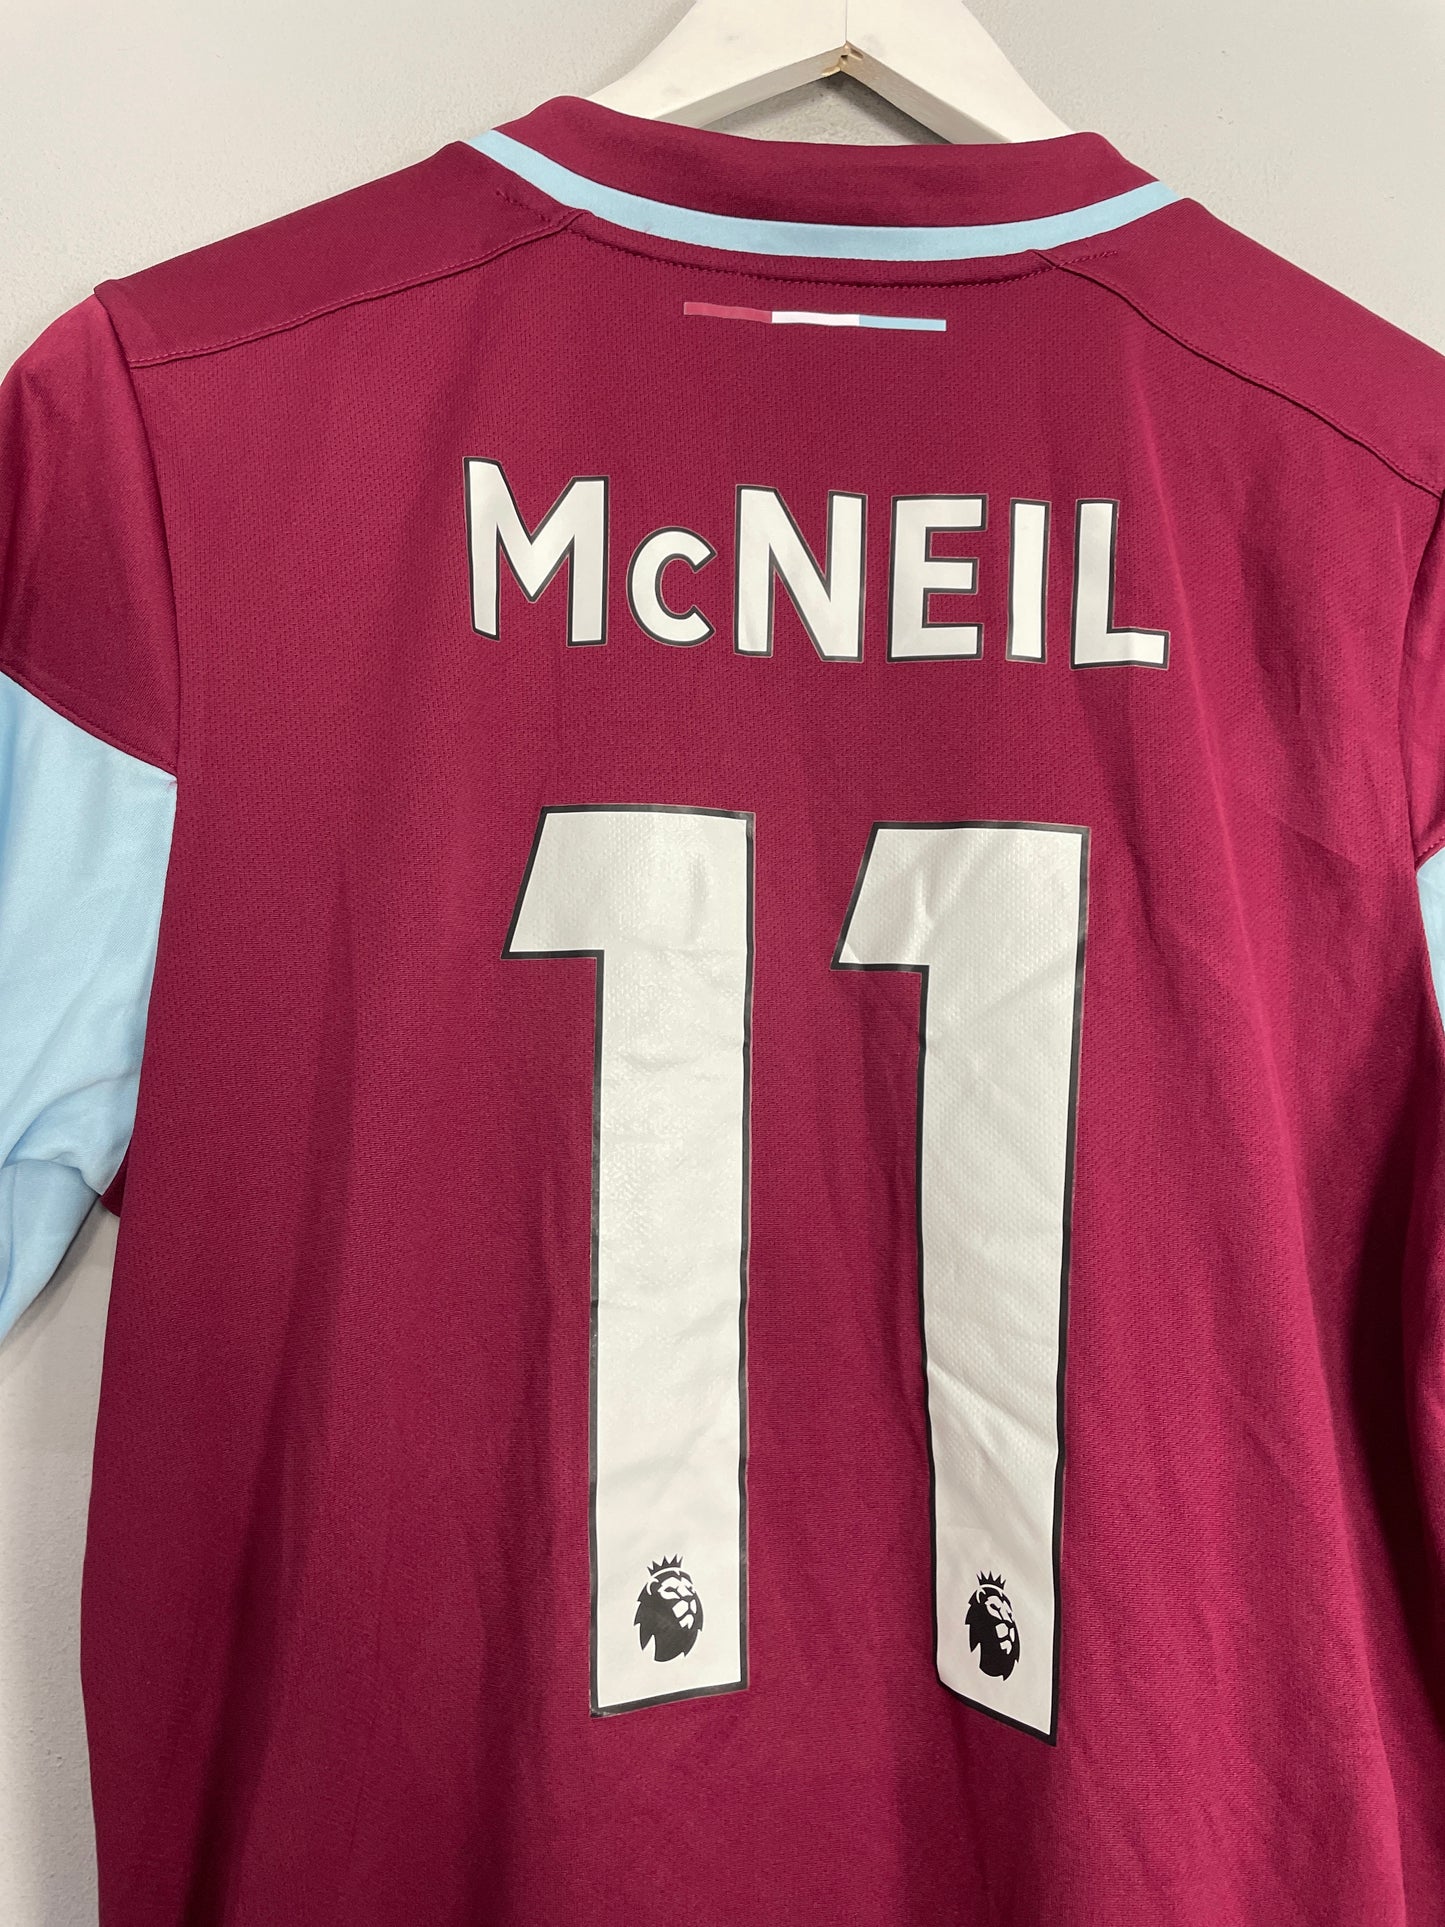 2020/21 BURNLEY MCNEIL #11 *MATCH ISSUE* FA CUP HOME SHIRT (M) UMBRO